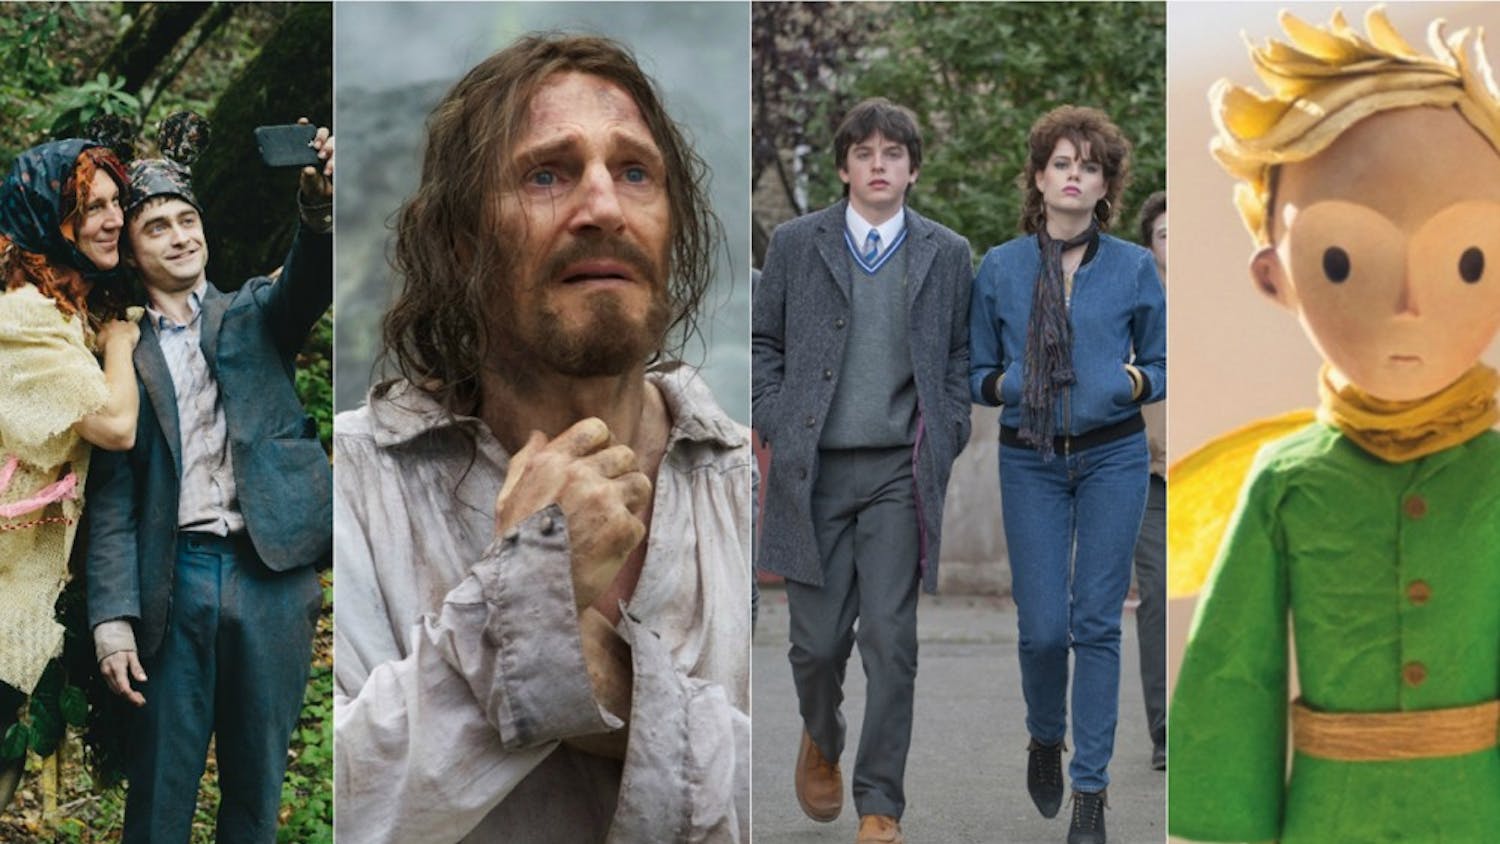 "Swiss Army Man," "Silence," "Sing Street" and "The Little Prince" missed out on Oscar nominations this year.